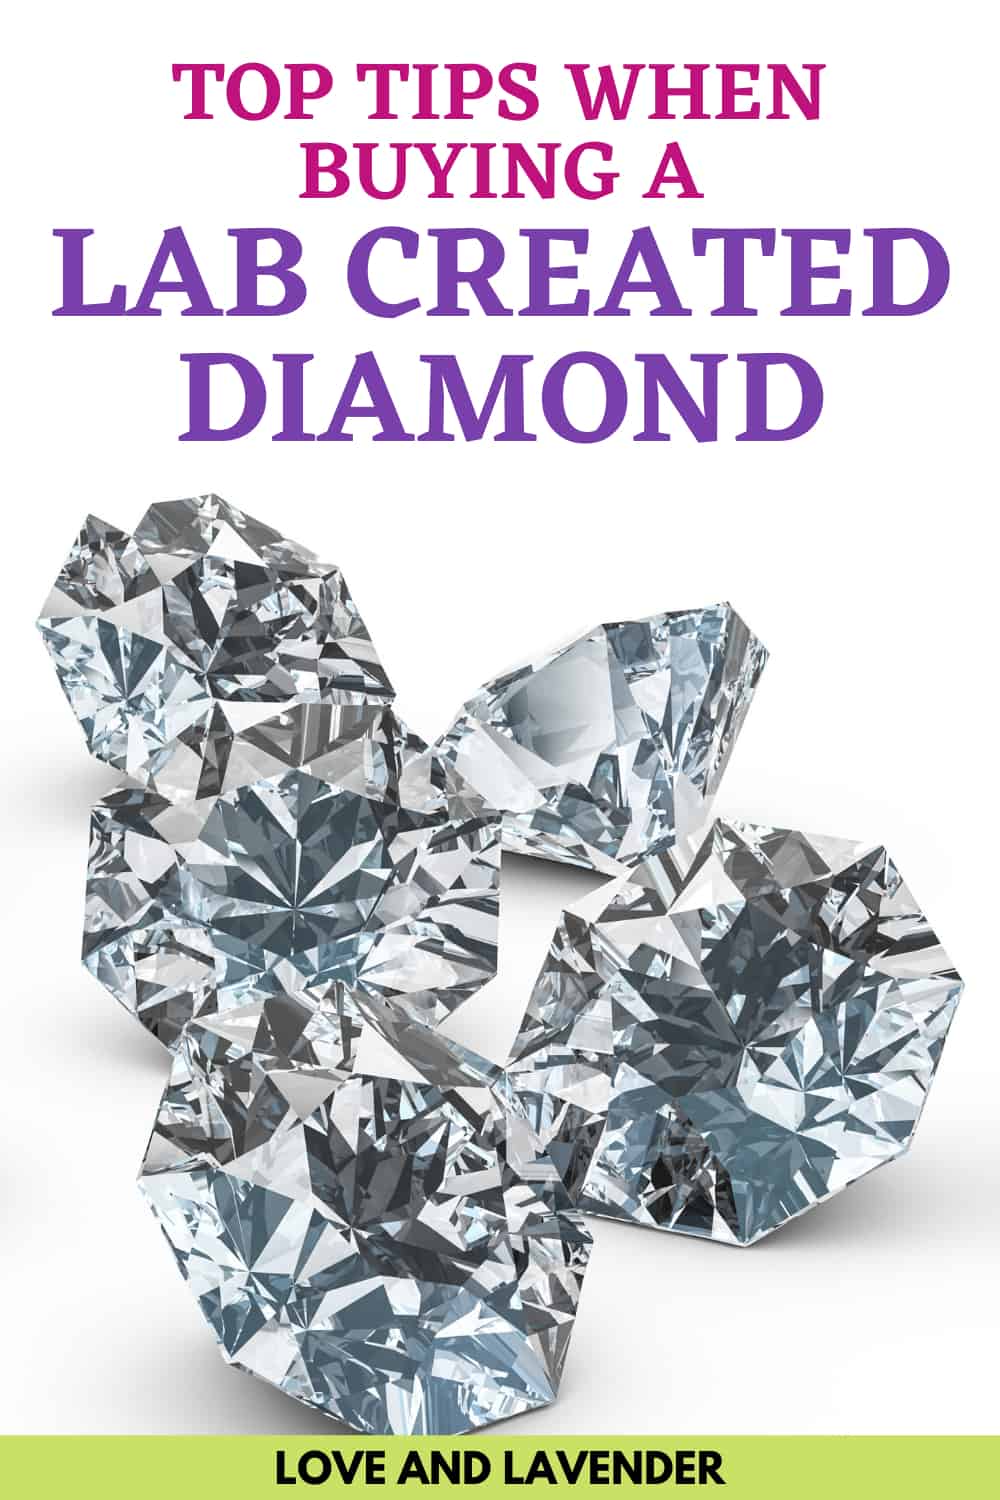 A Quick Buying Guide to Lab Created Diamonds - Pinterest pin